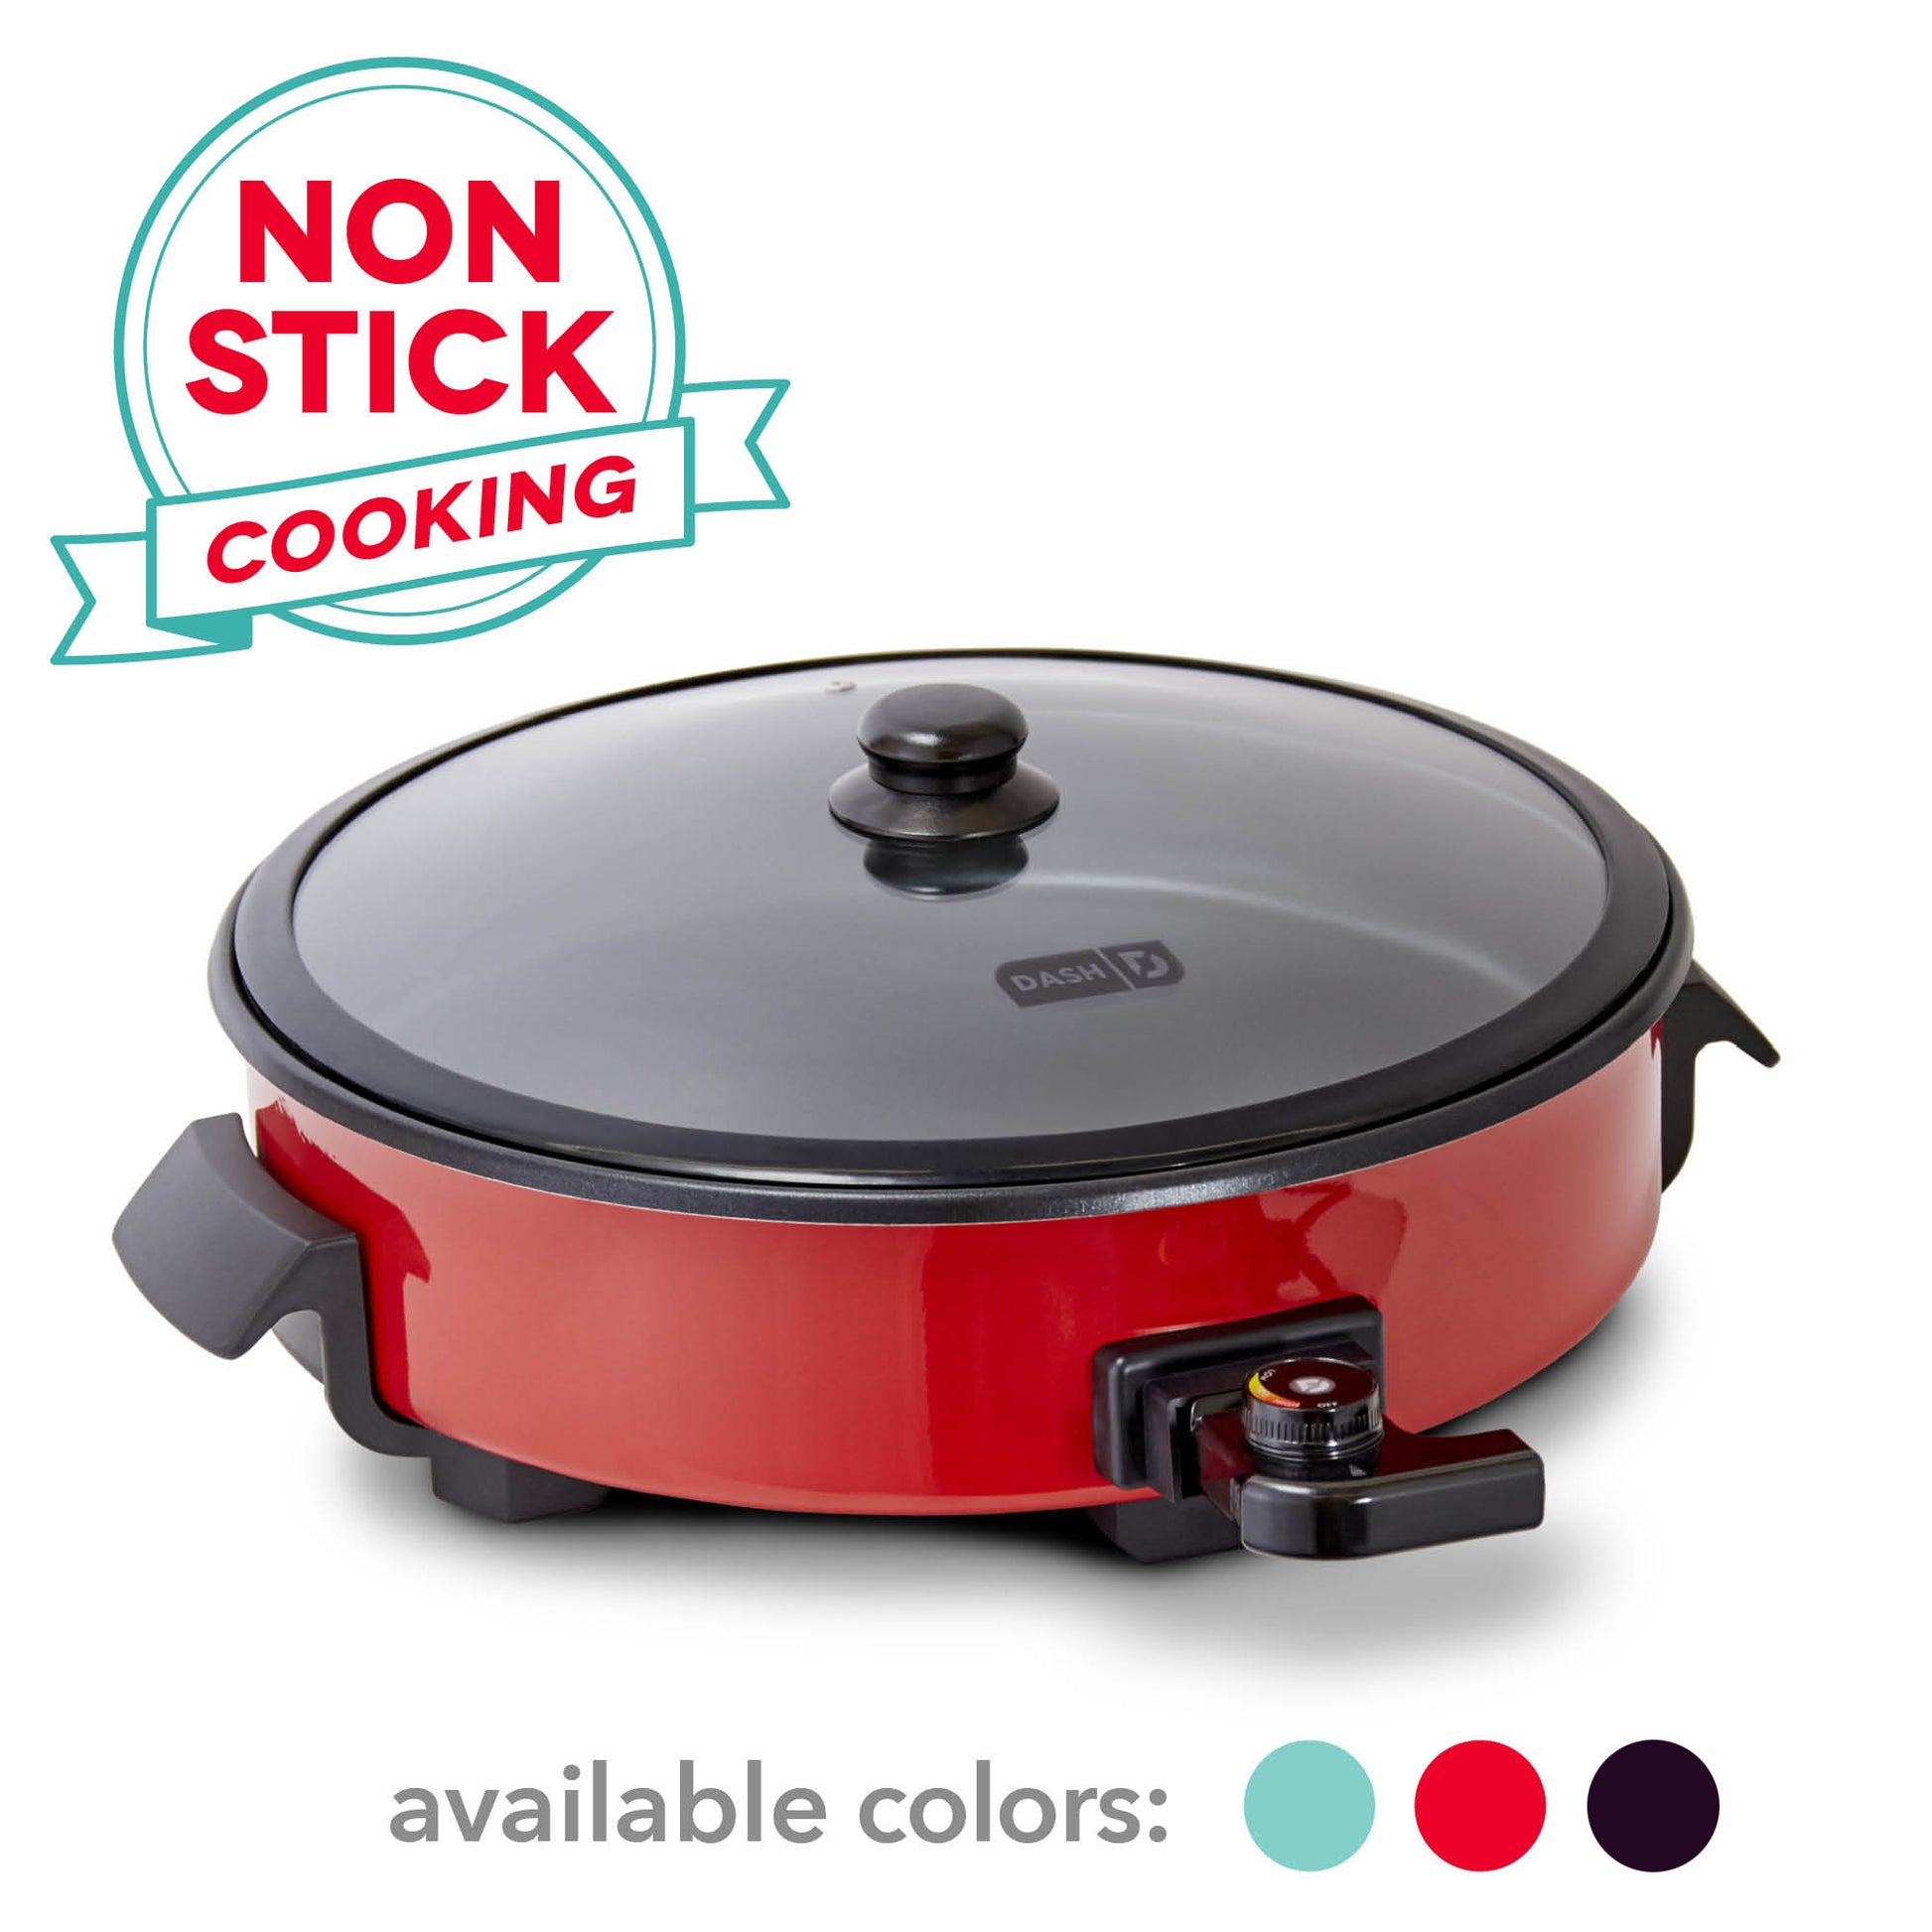 Large Capacity Nonstick Electric Skillet - Serves 4 to 6 People (16 inch)